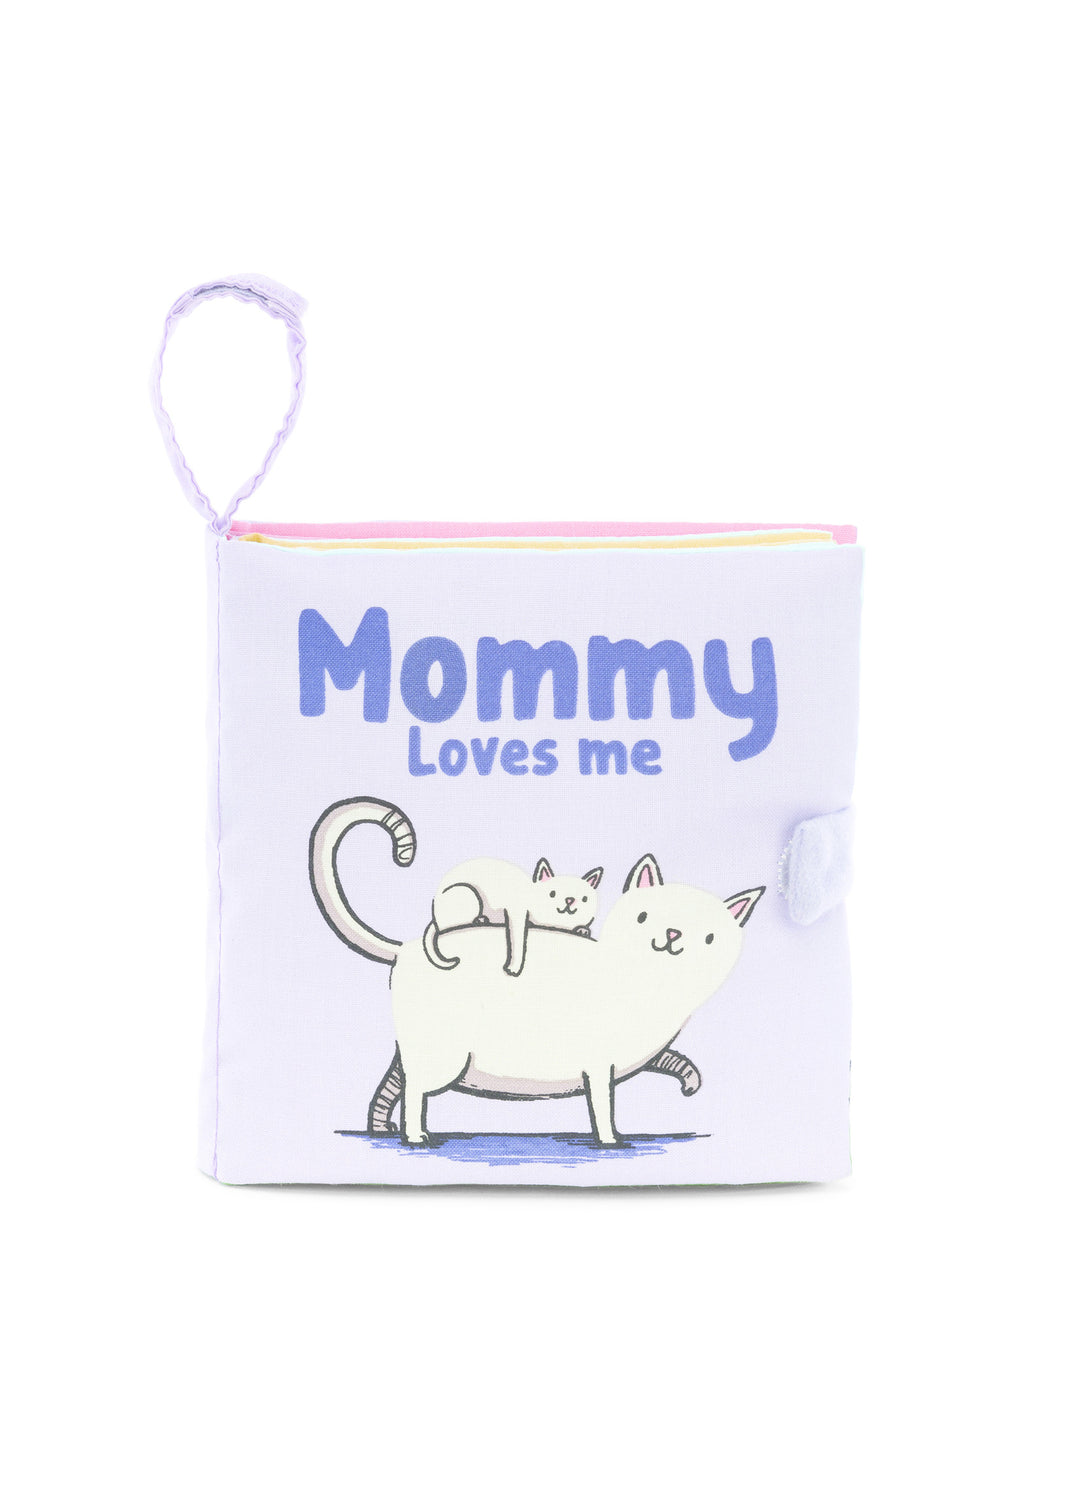 MOMMY LOVES ME BOOK - Kingfisher Road - Online Boutique